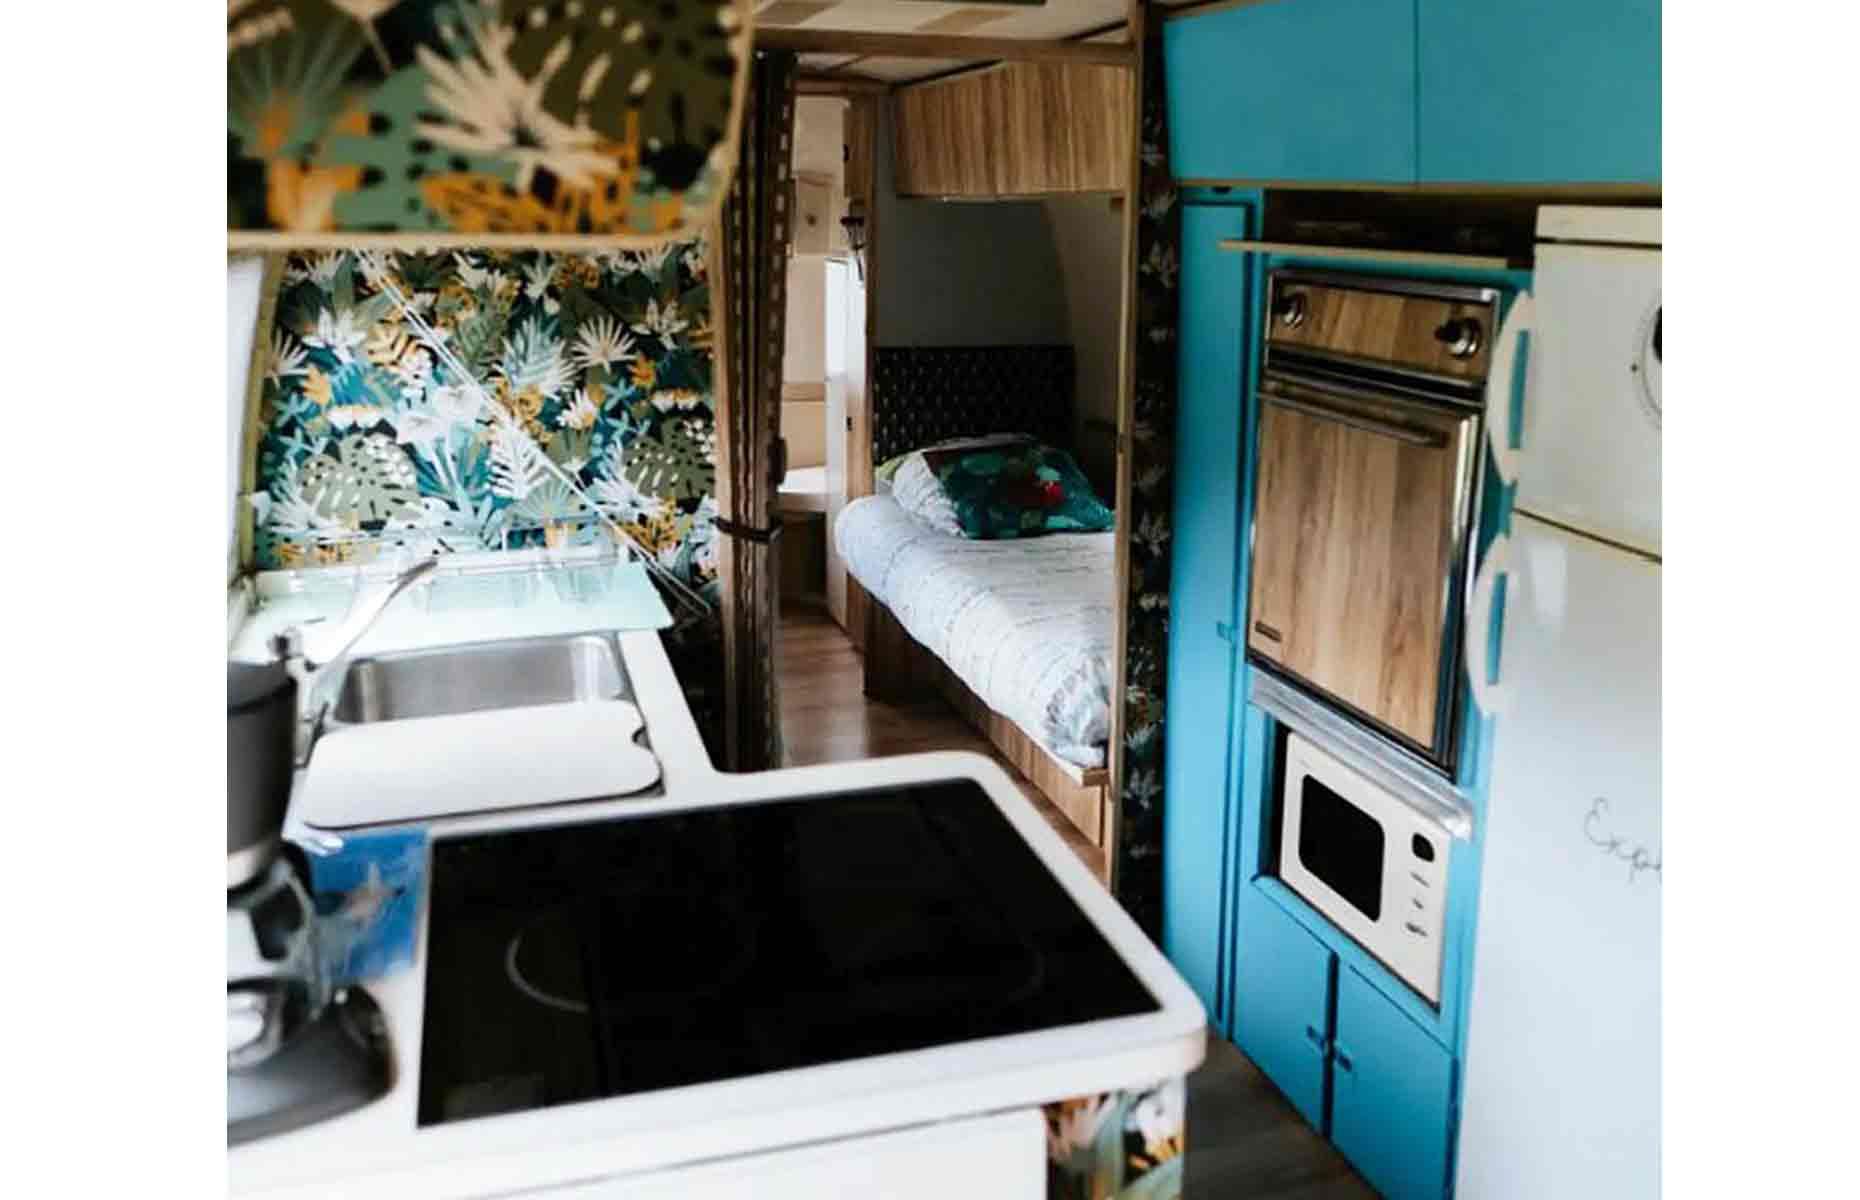 <p>Inside, the vintage Airstream has been kitted out to the very highest standard of modern luxury. The compact kitchen comes fully equipped with a hob, oven, microwave and sink, as well as a fun splashback and blue cupboards reminiscent of the vehicle’s 60s origins.</p>  <p>Remarkably, the tiny Airstream can sleep up to four, with a cosy alcove bed and a couch that folds out into another bed.</p>